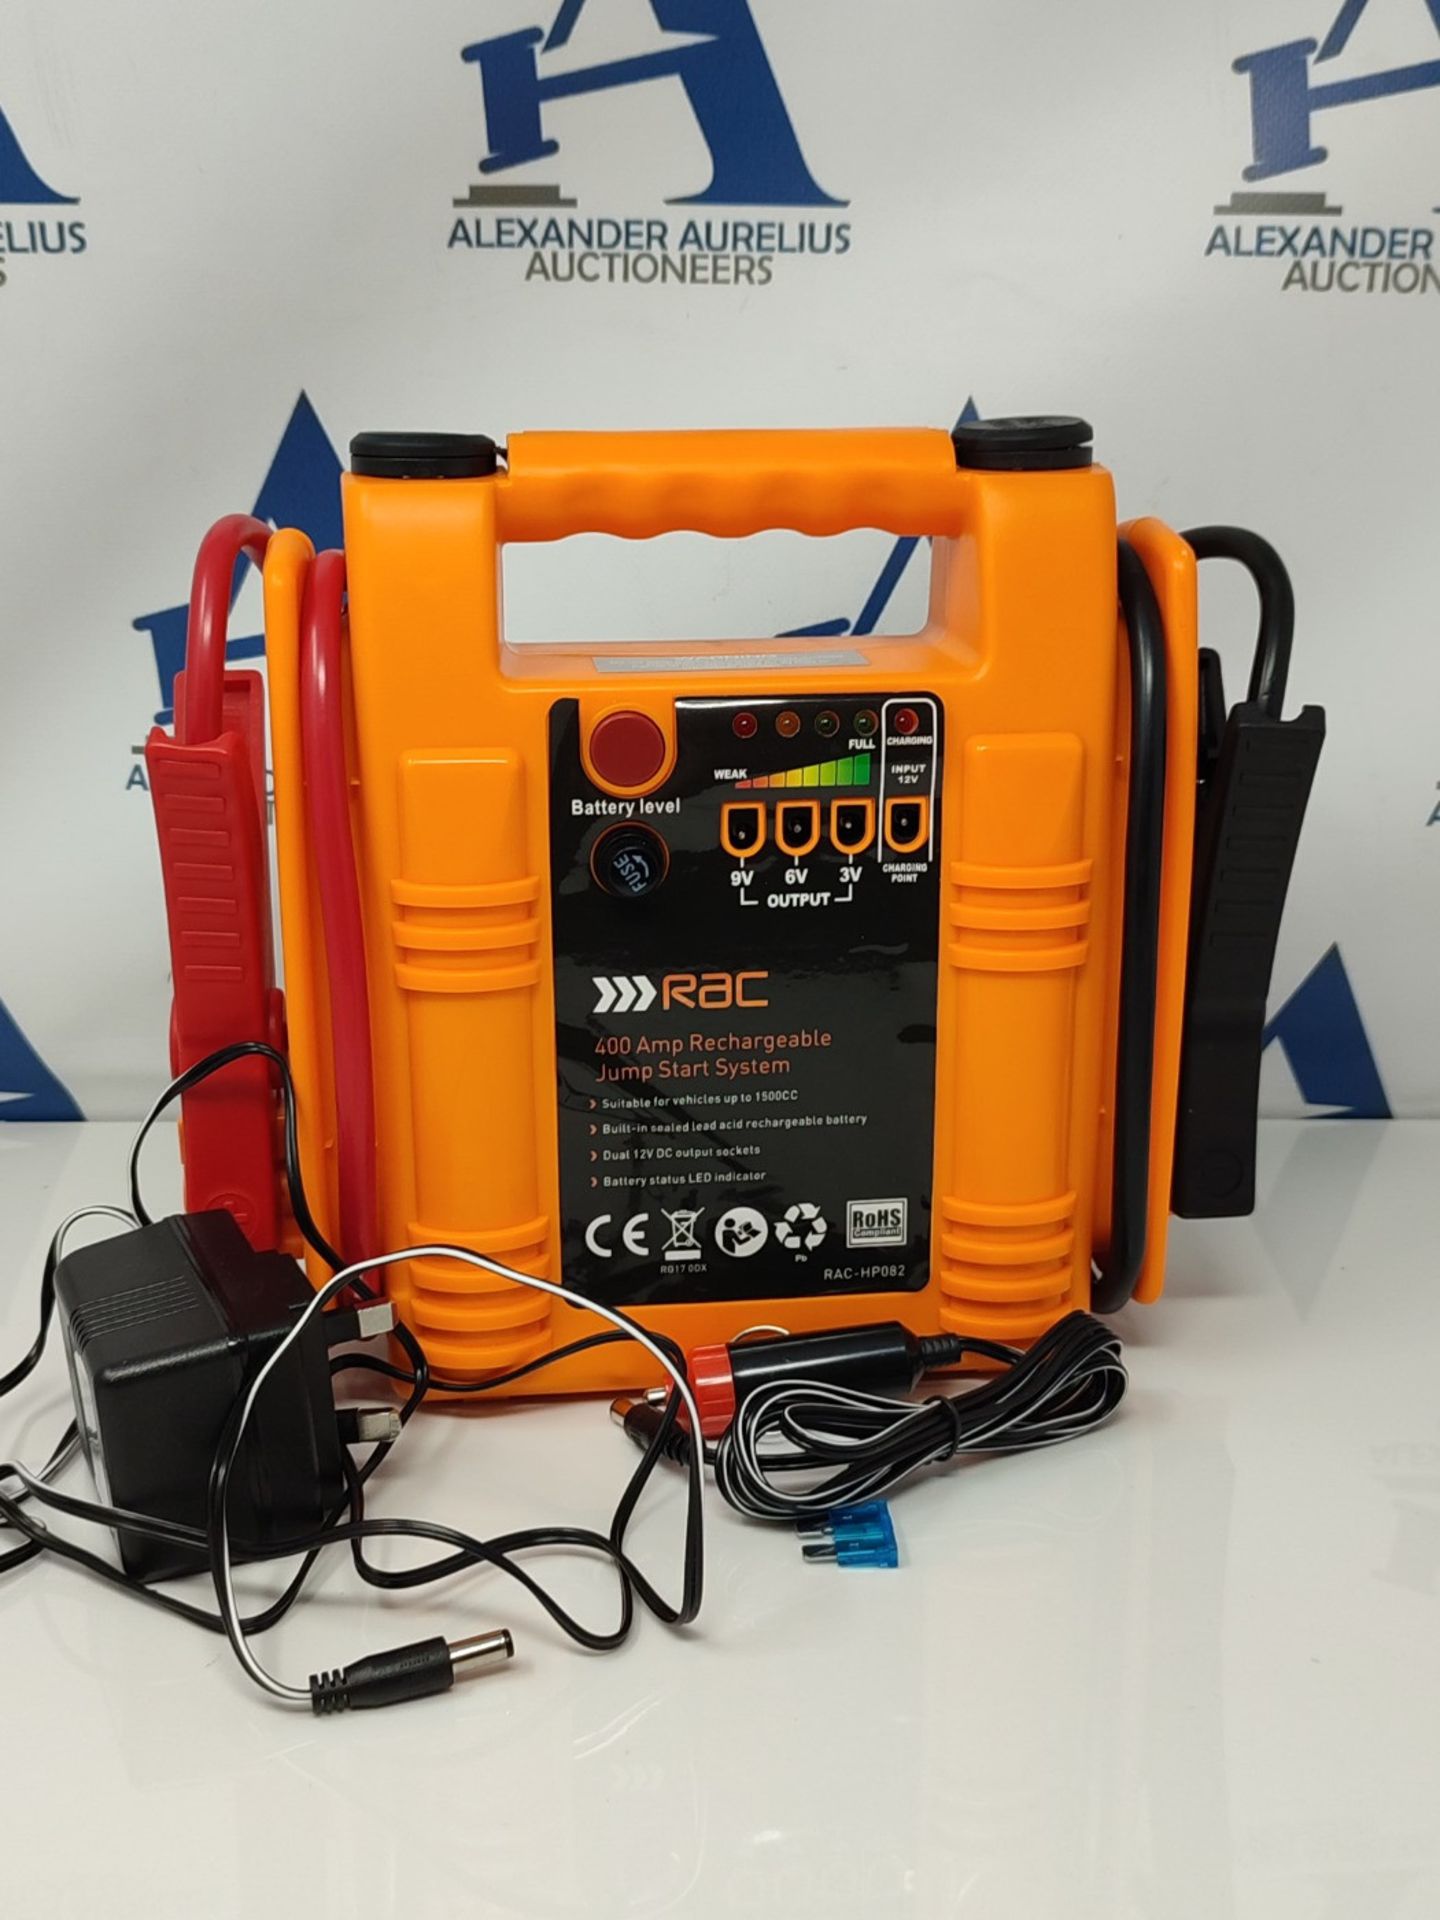 RAC 400 Amp Rechargeable Jump Start System HP082 - For Car Batteries up to 1500cc, Ora - Image 3 of 3